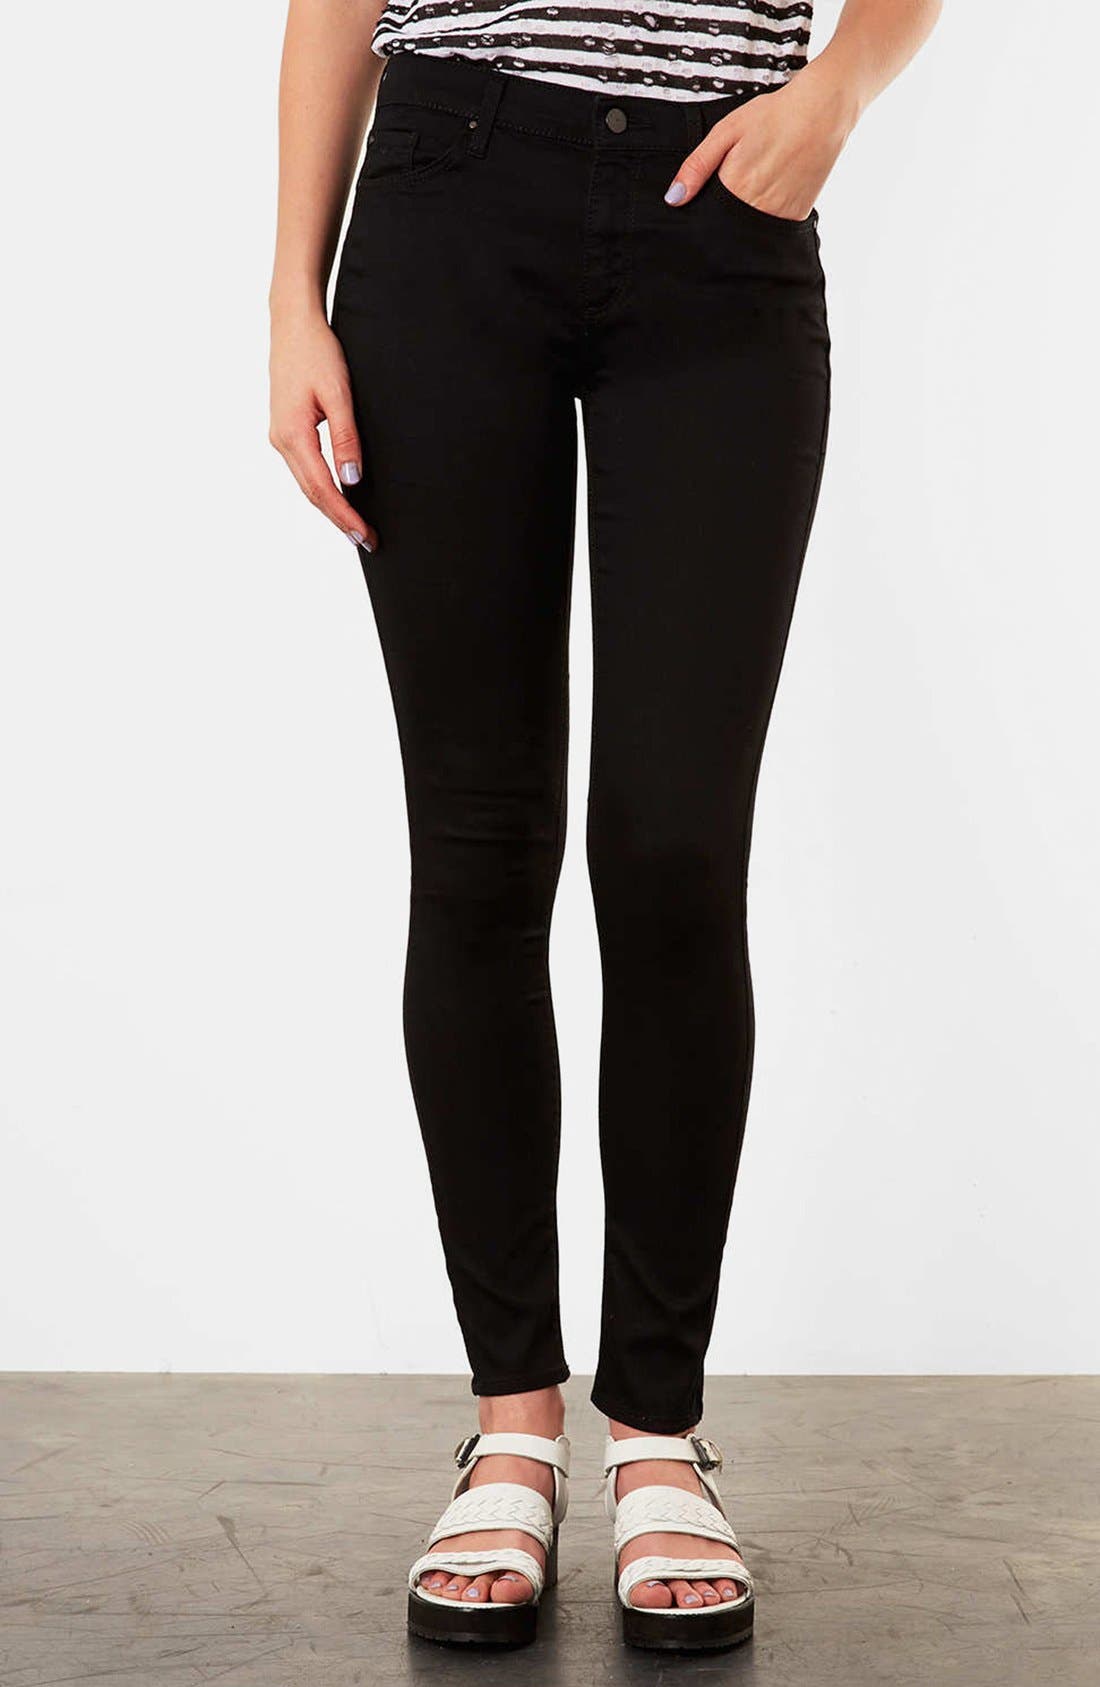 topshop leigh petite jeans